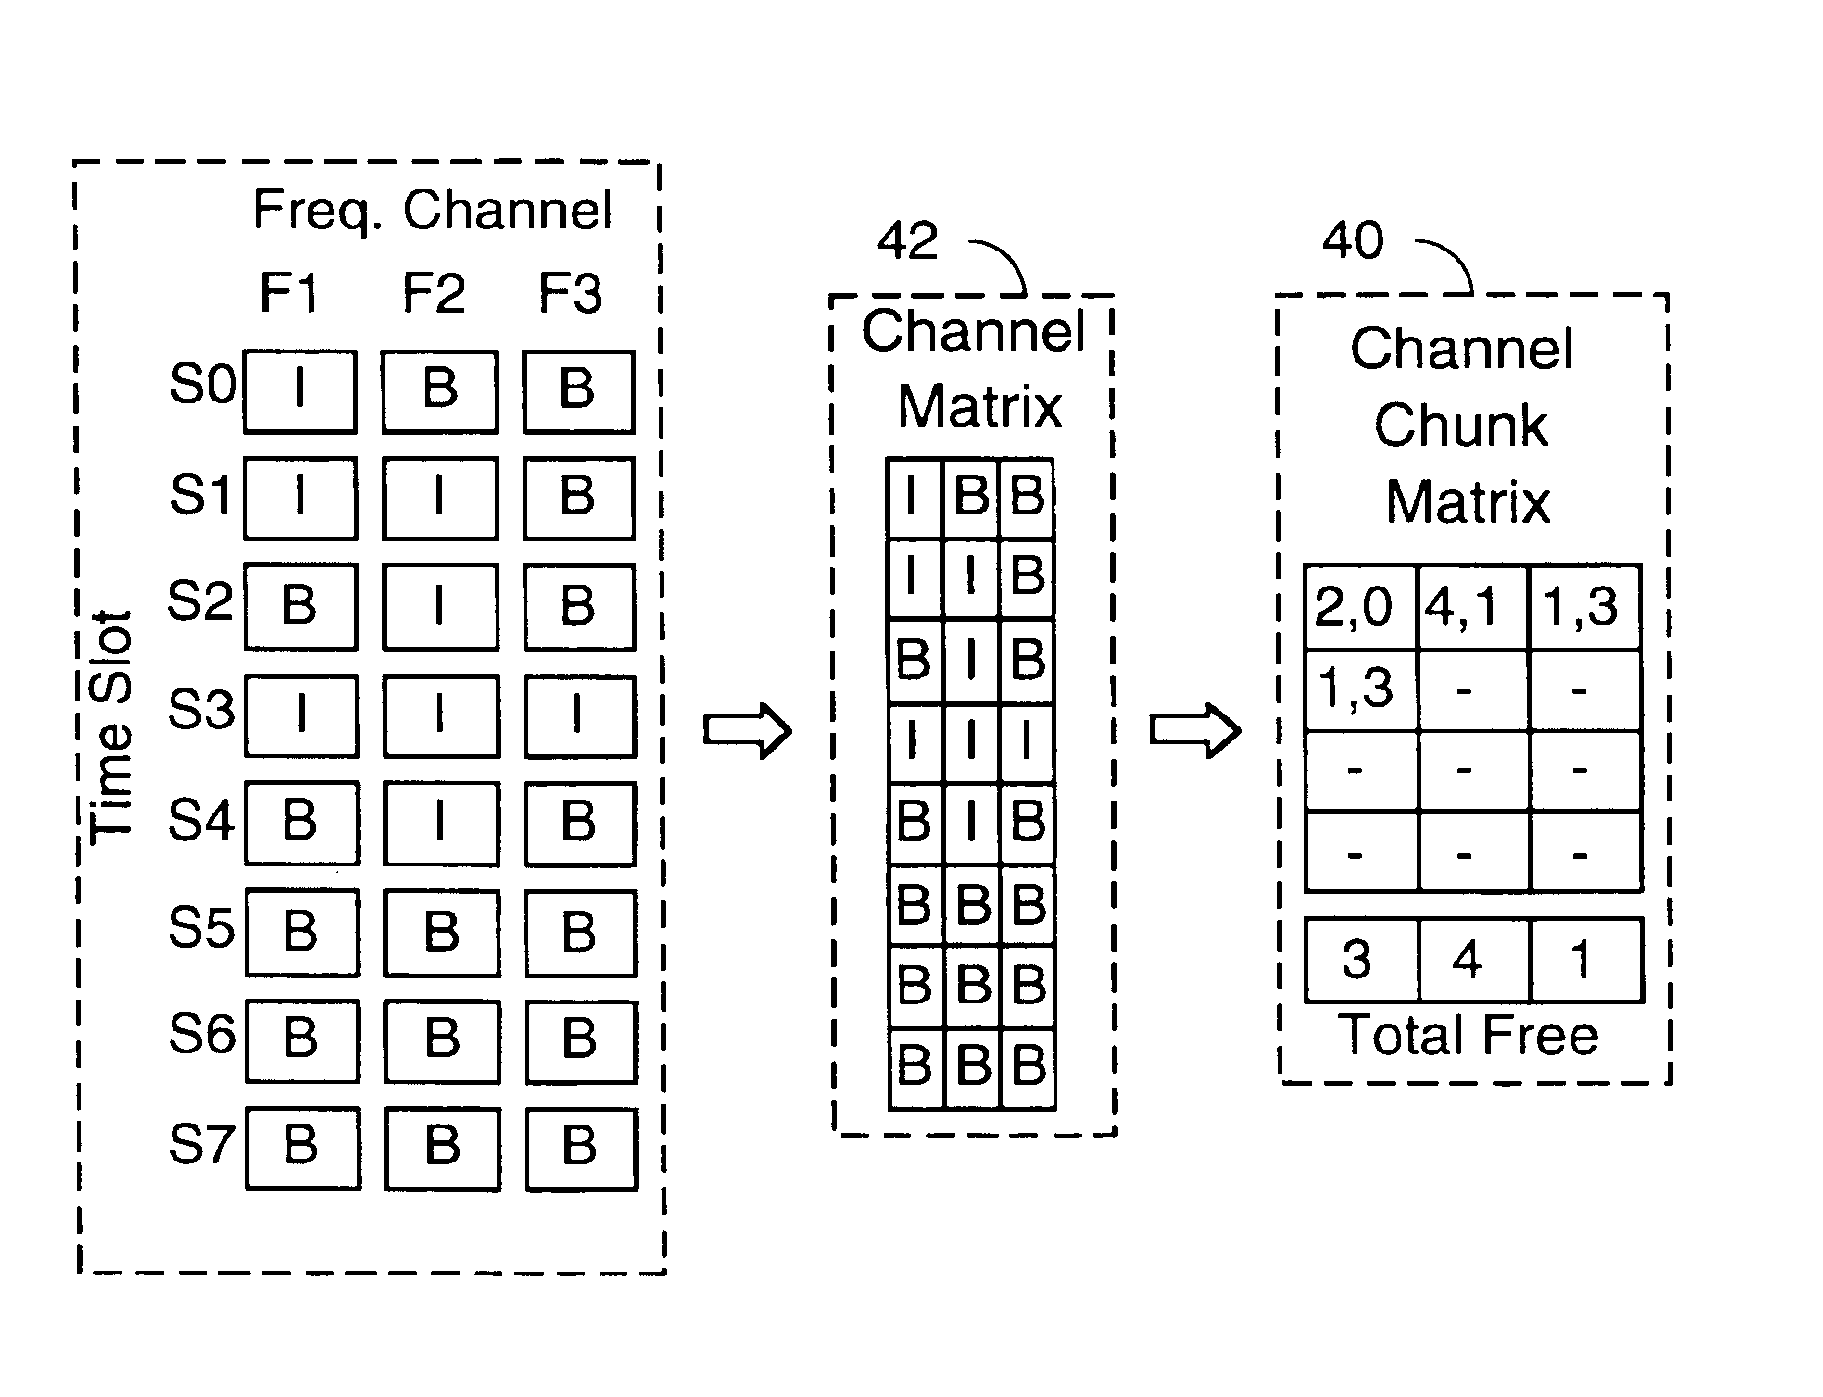 Dynamic resource allocation and media access control for a wireless ATM network